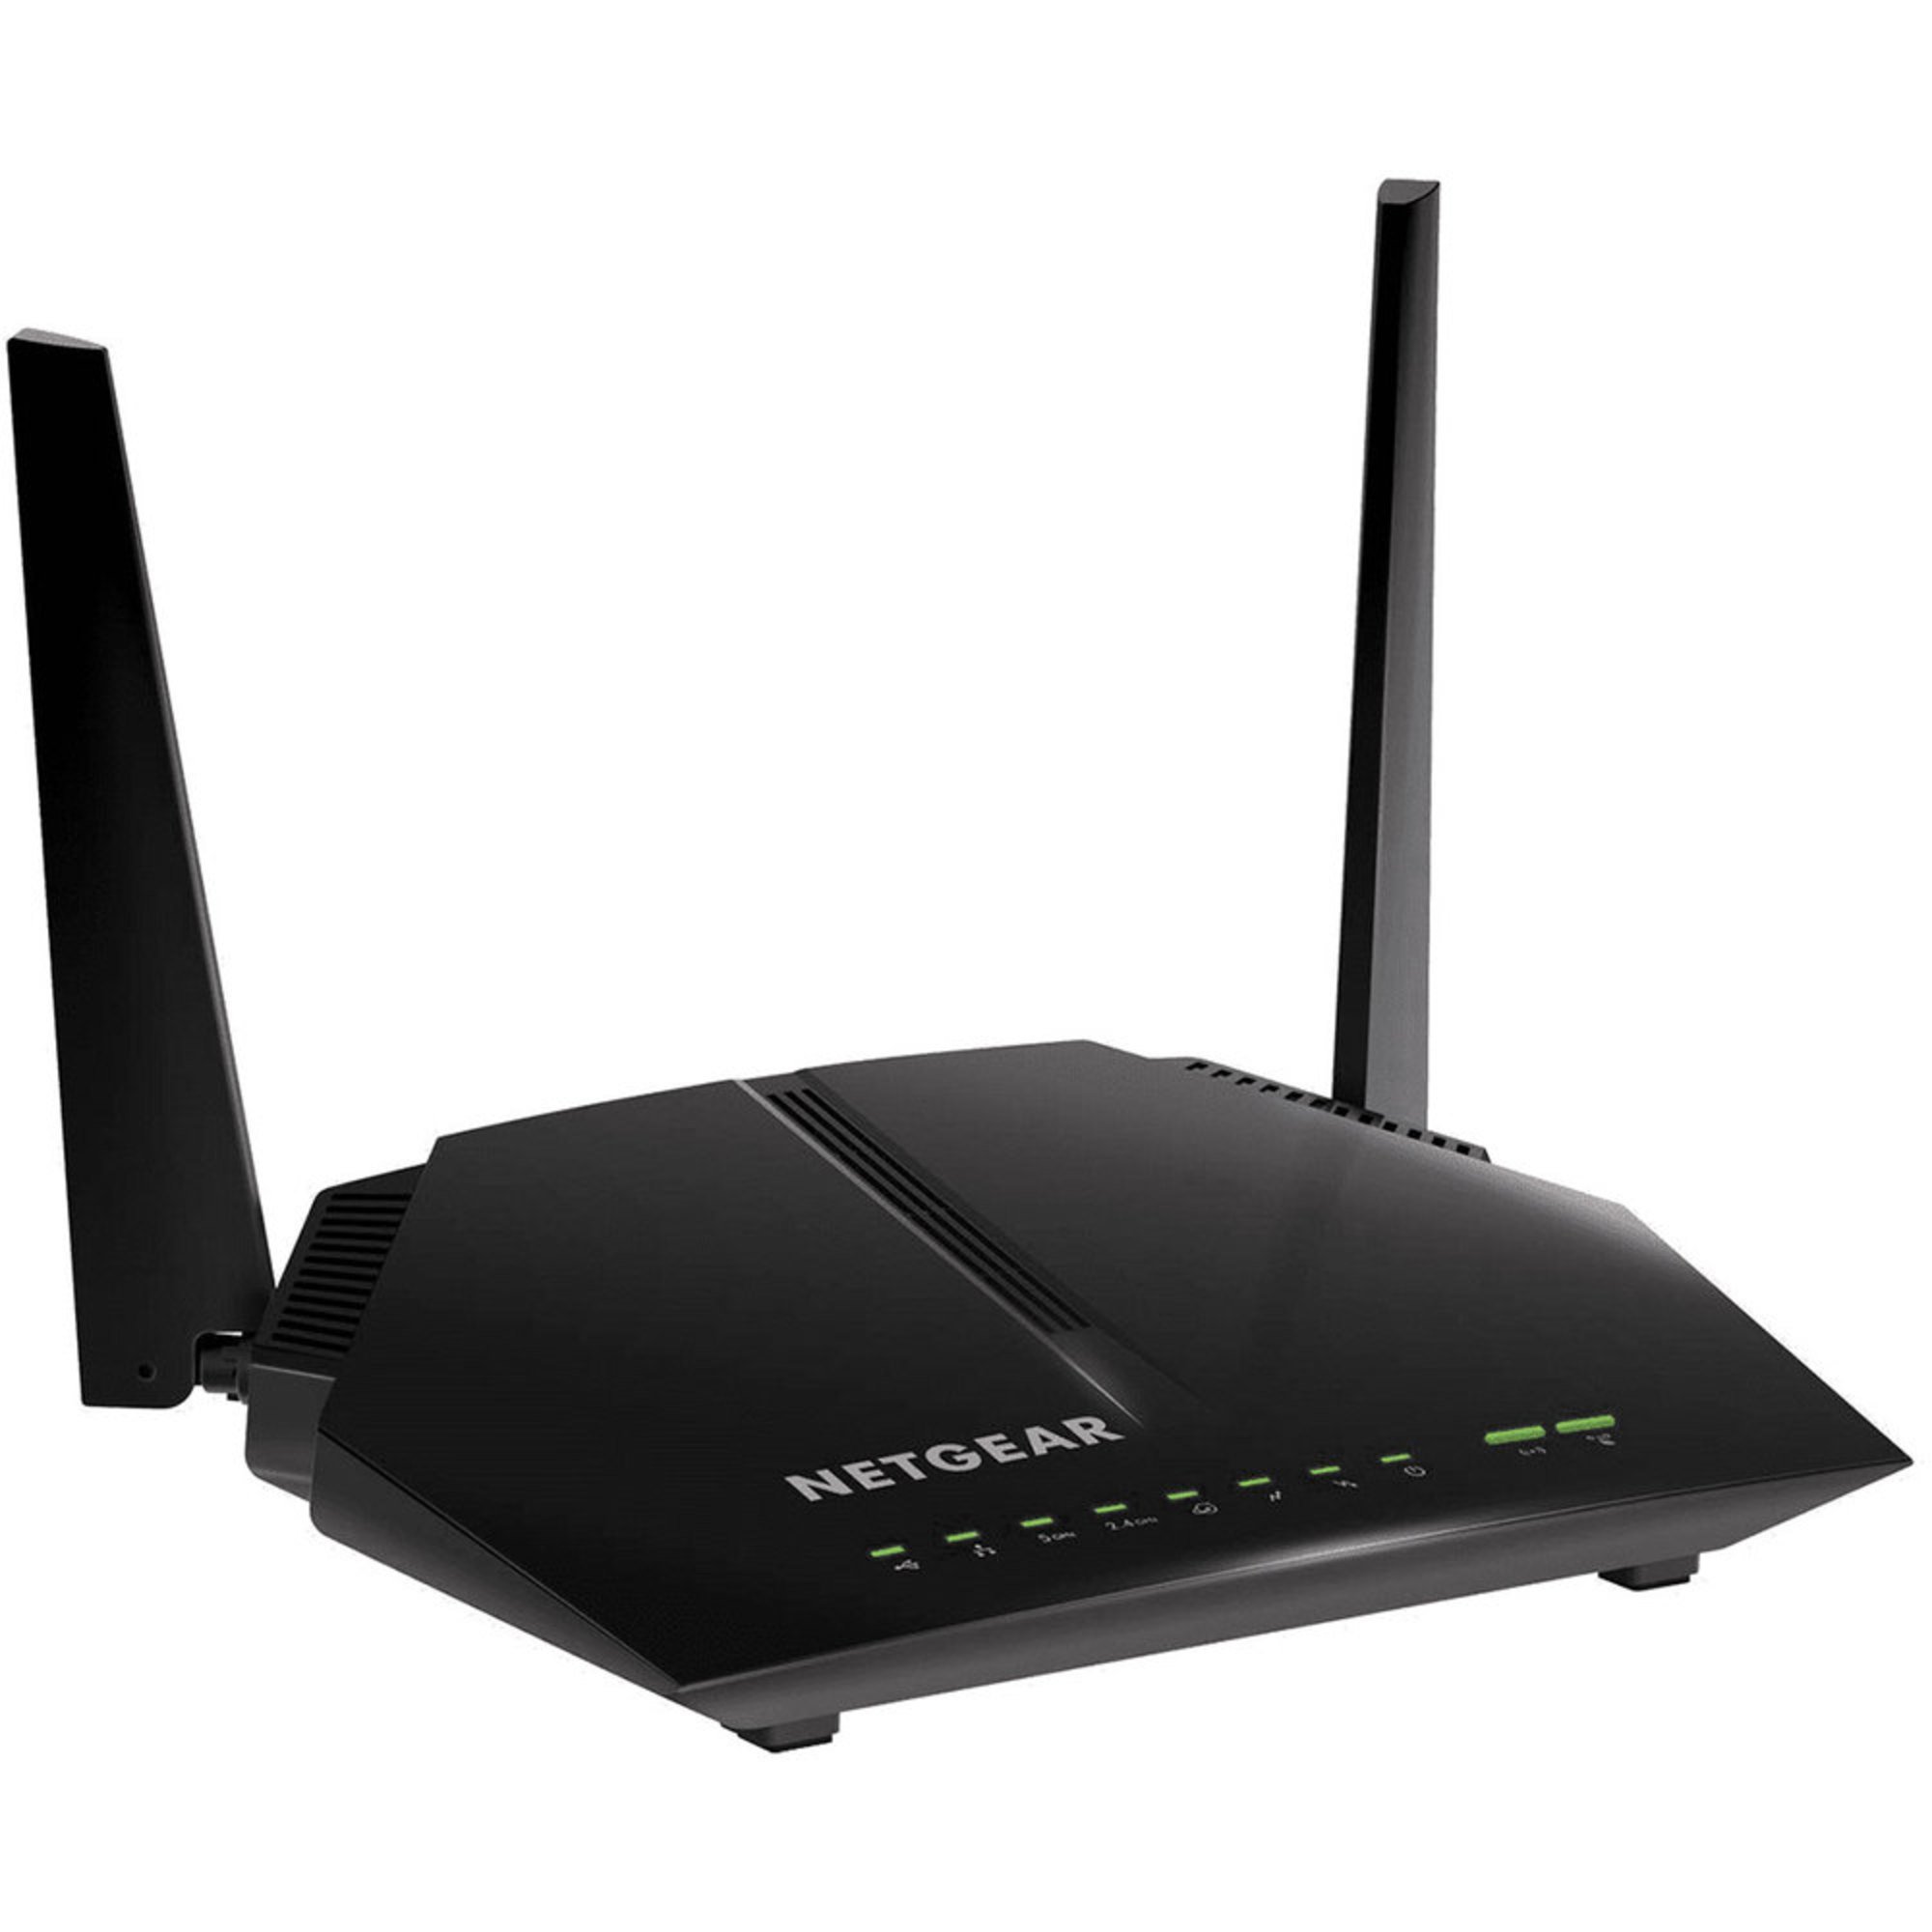 Netgear Dual-band Ac1200 Router With 8 X 4 Docsis 3.0 Cable Modem